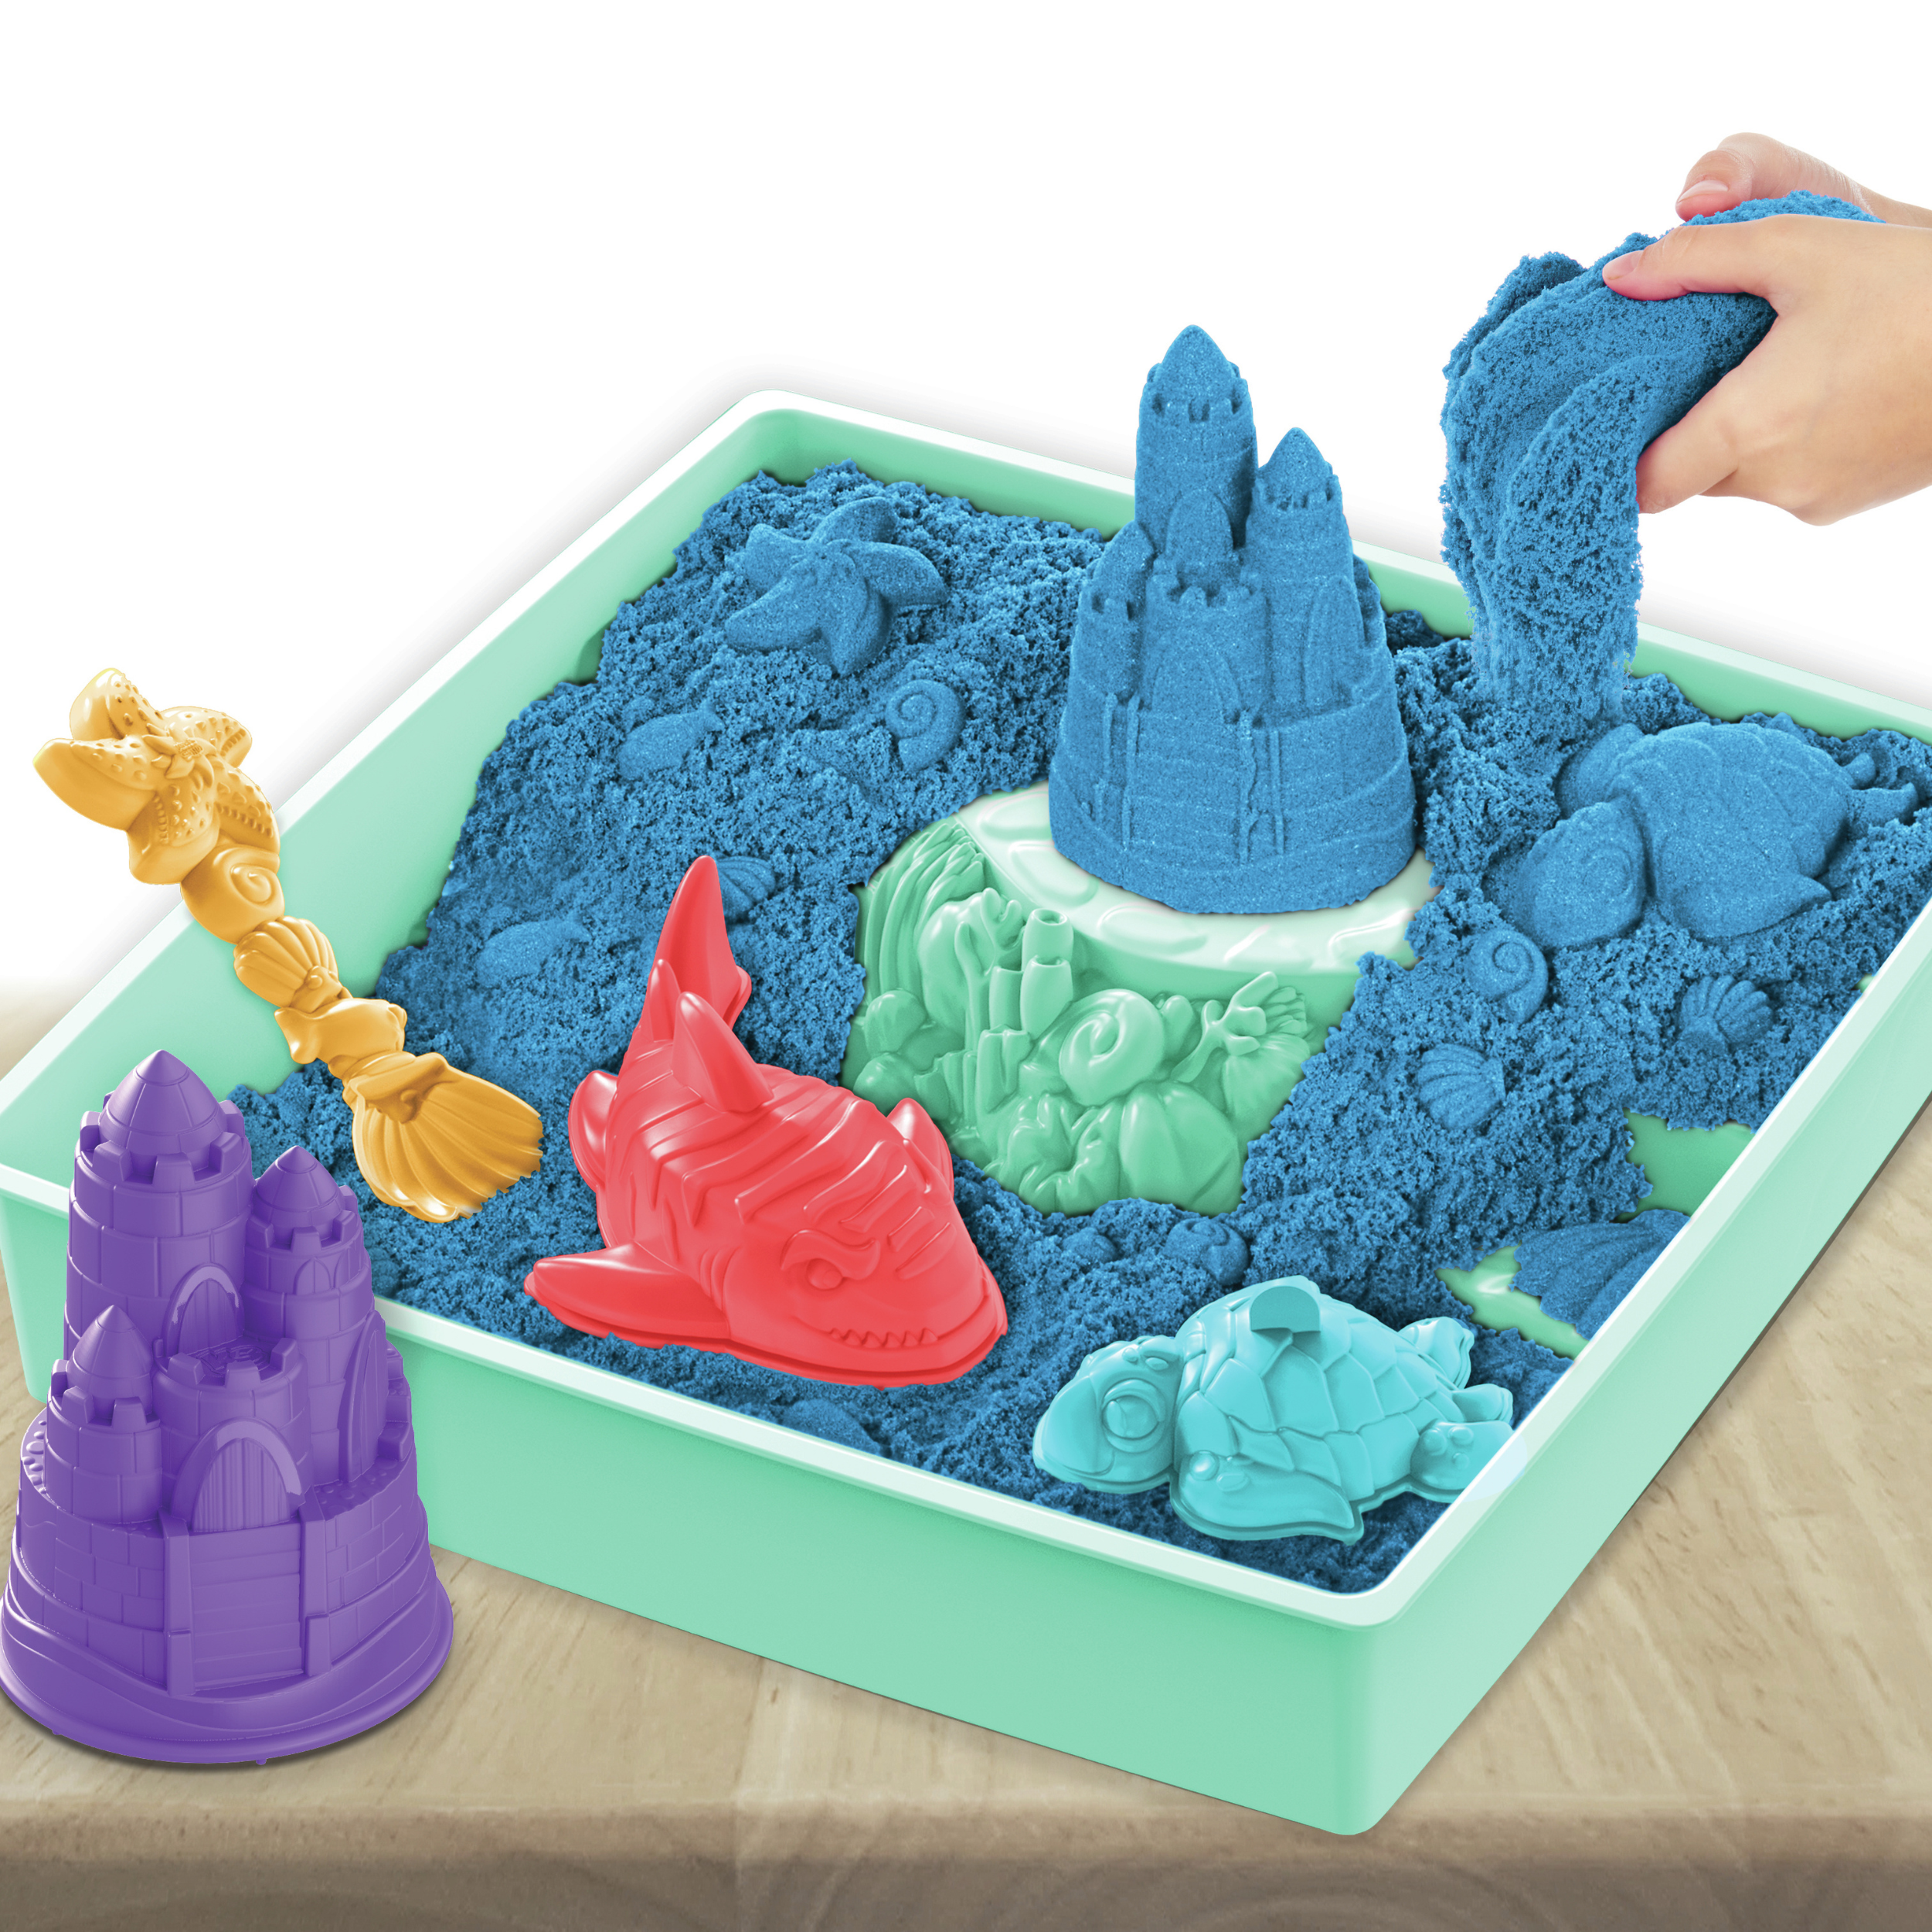 Kinetic Sand, Sandbox Playset with 1lb of Green Kinetic Sand and 3 Molds,  for ages 3 and up – Shop Spin Master